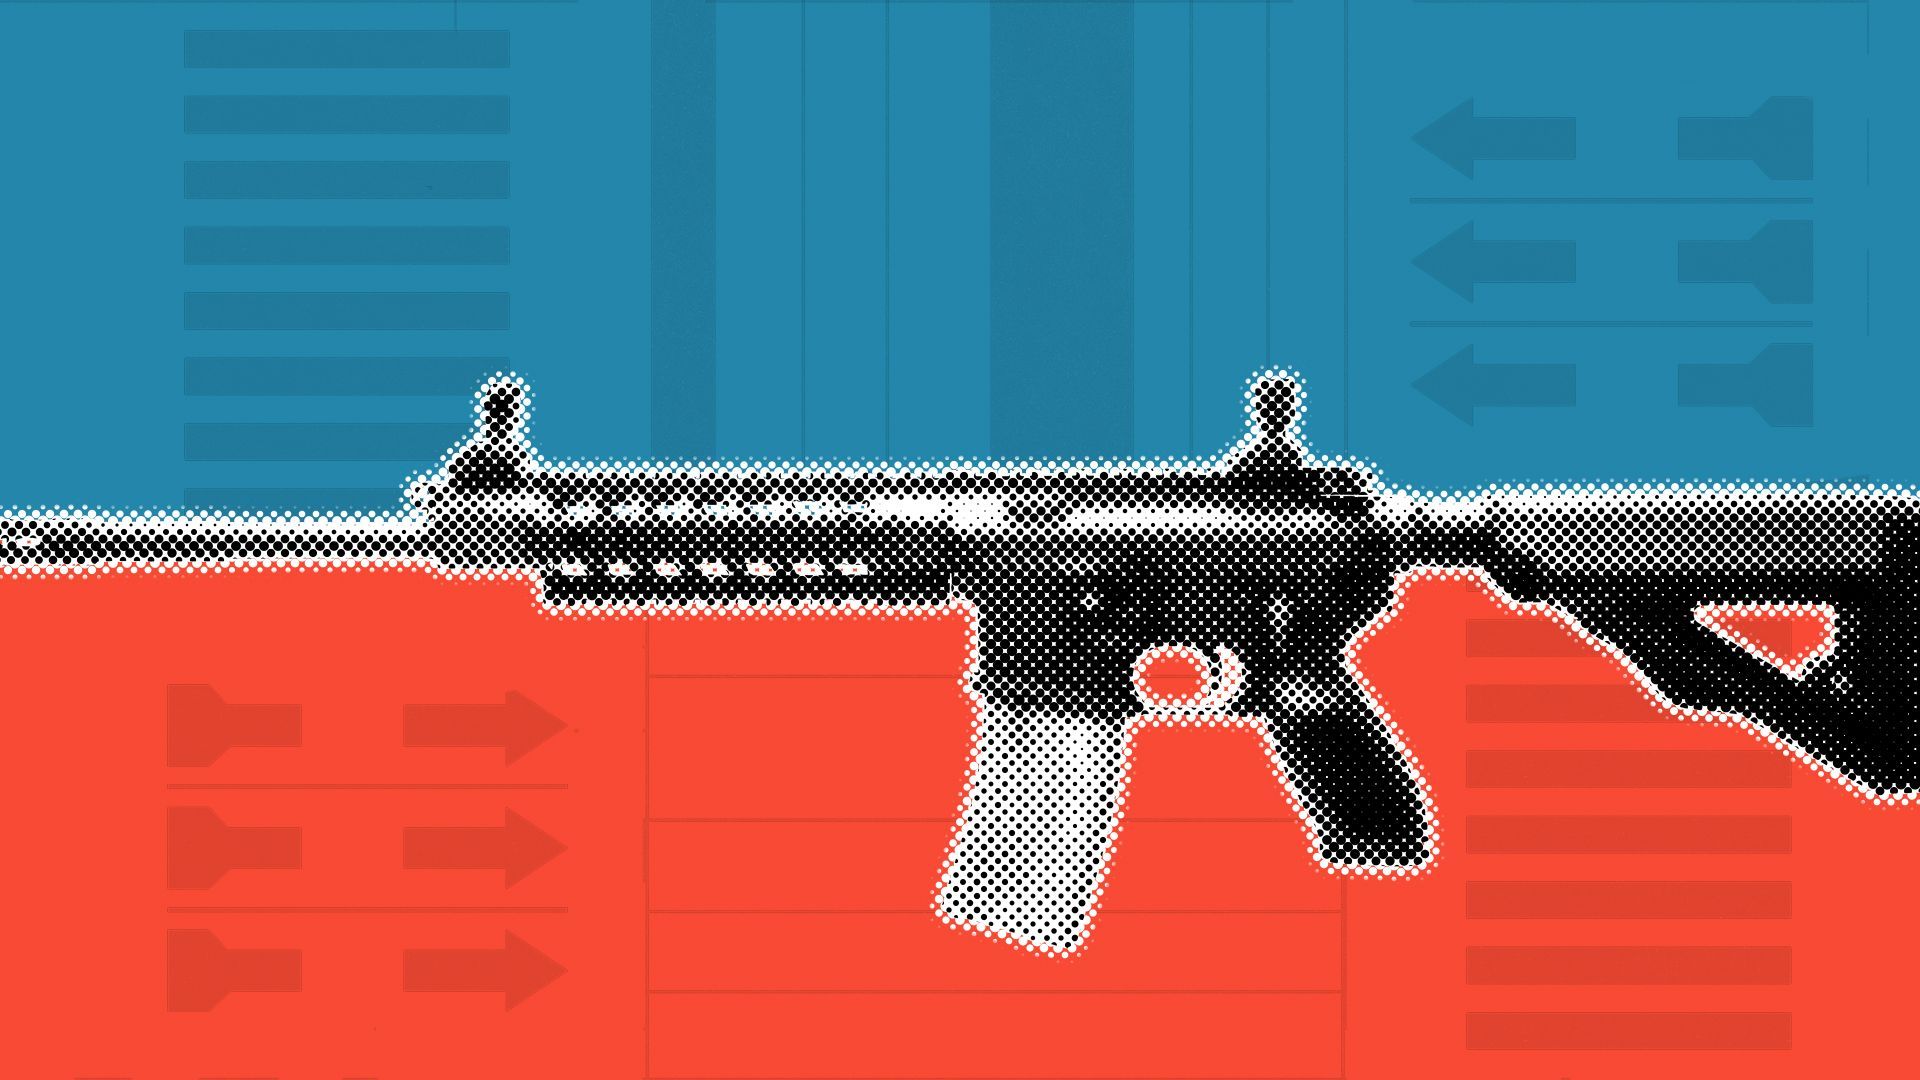 Illustration of a gun separating color blocks of blue and red, with elements from ballots in the background.